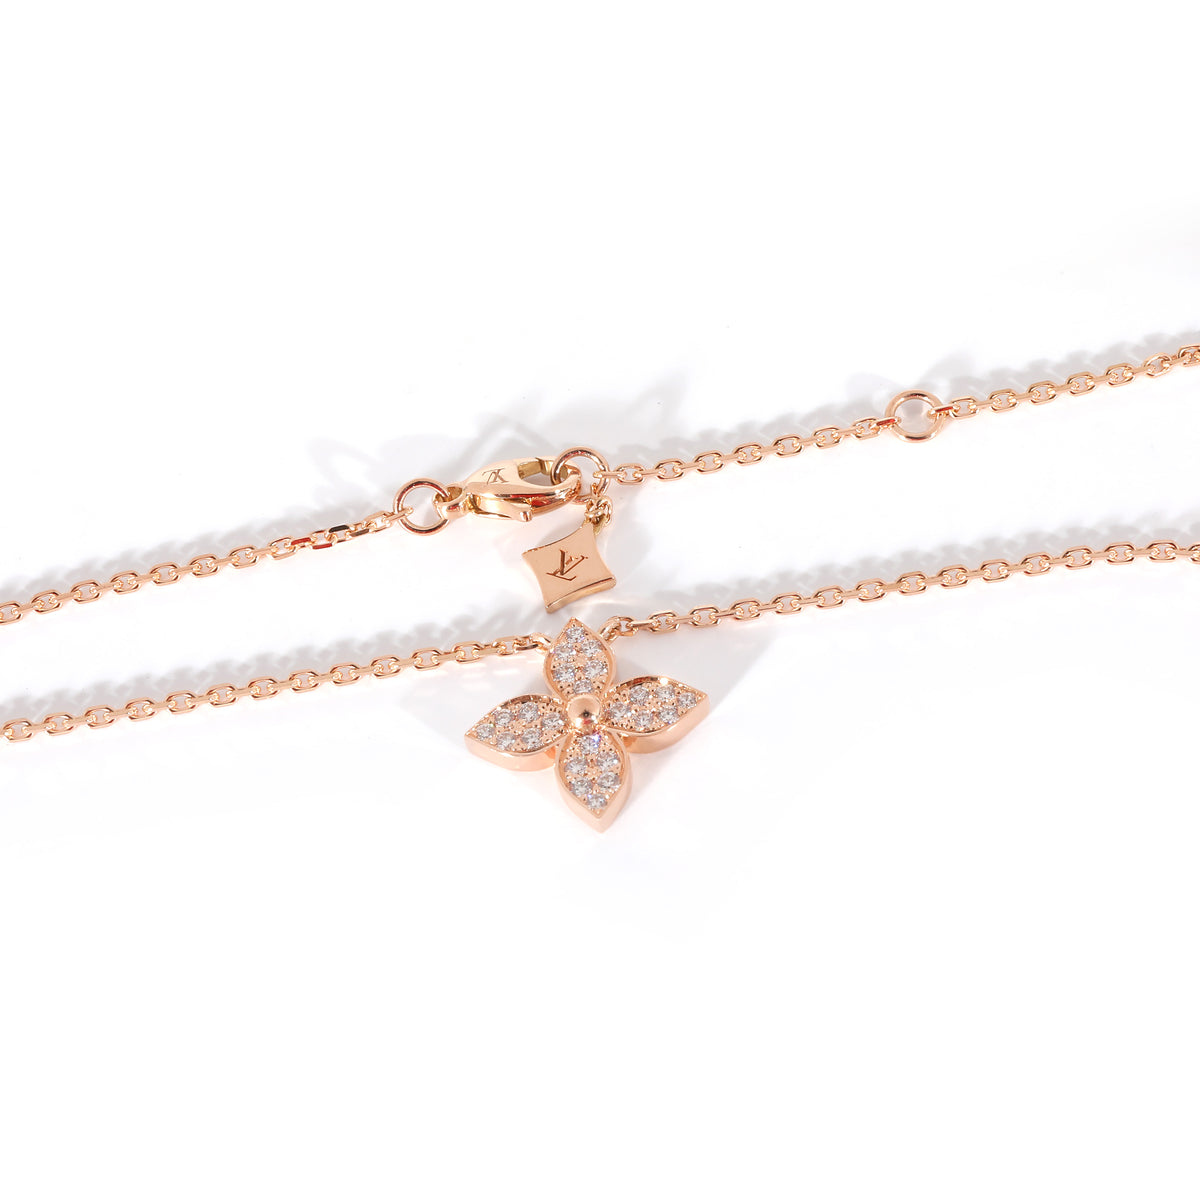 Louis Vuitton - Authenticated Idylle Blossom Necklace - Pink Gold White for Women, Very Good Condition